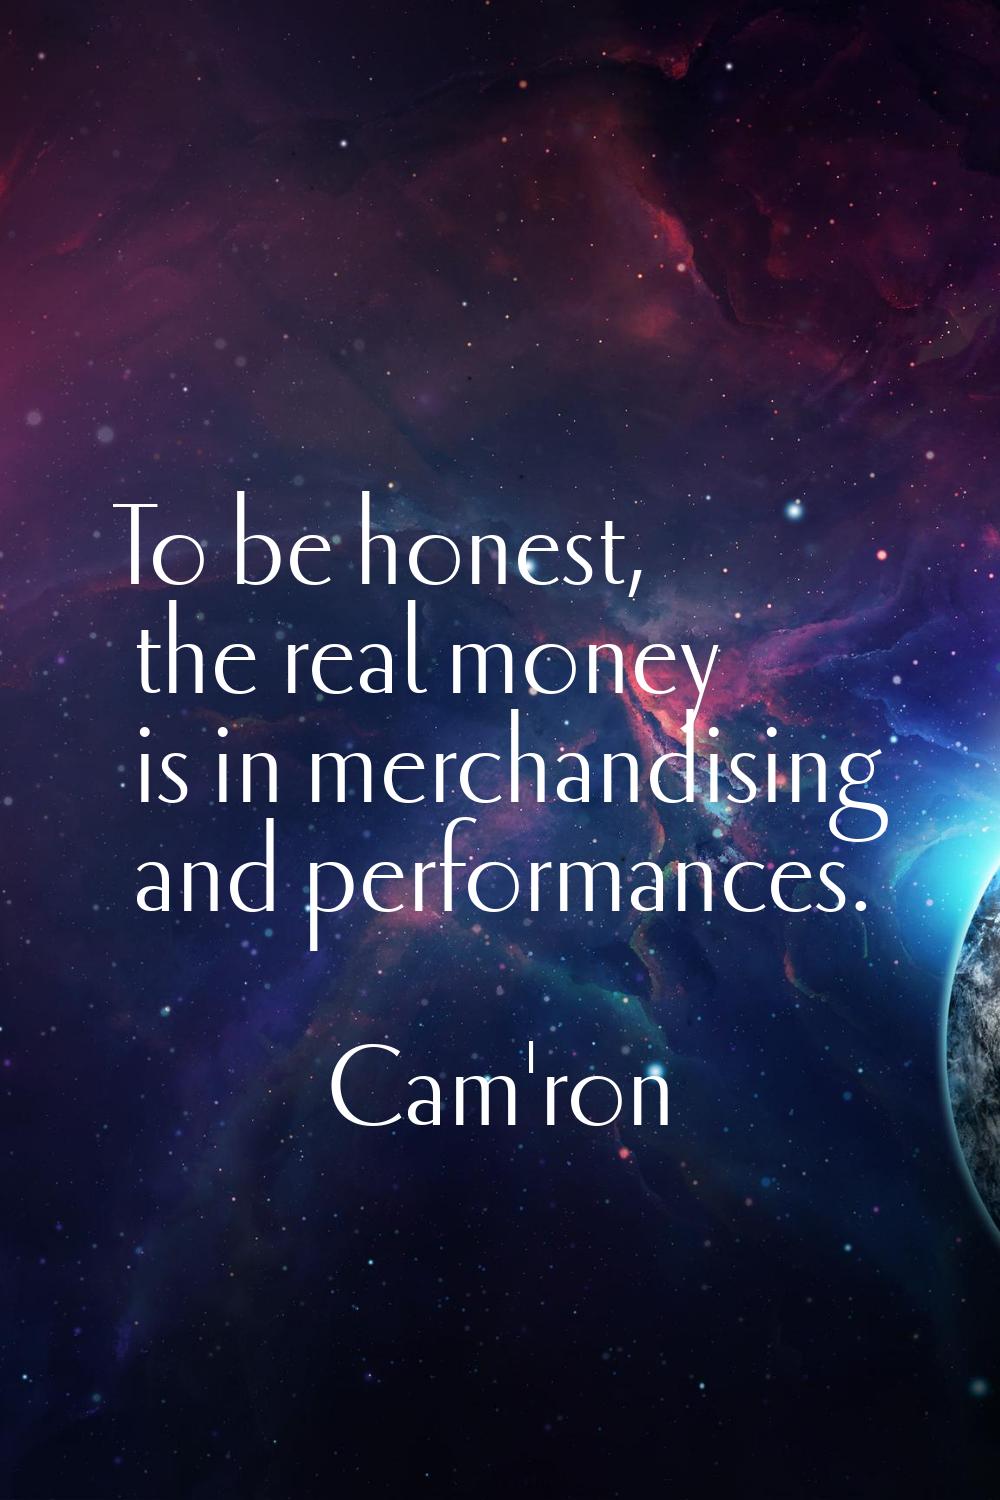 To be honest, the real money is in merchandising and performances.